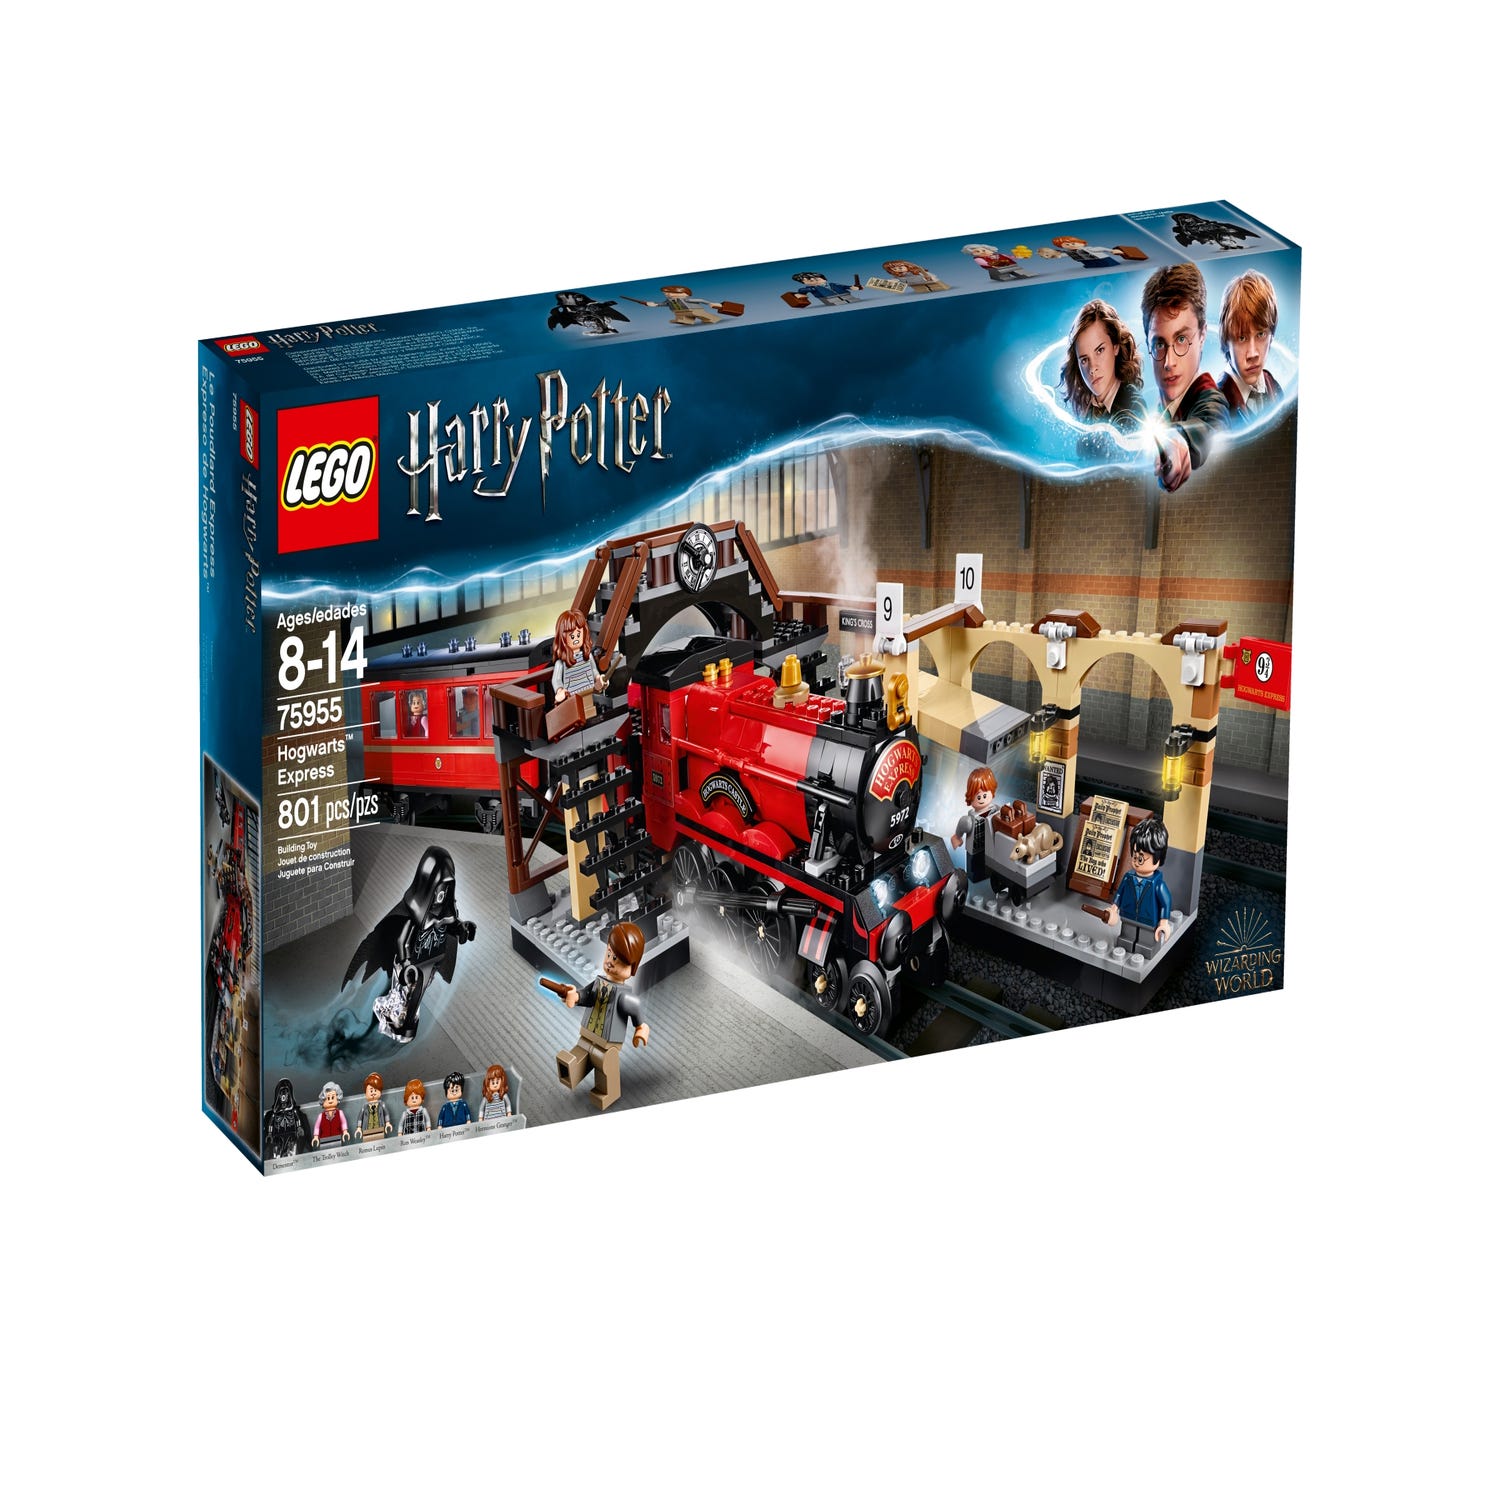 Hogwarts™ Castle and Grounds 76419 | Harry Potter™ | Buy online at the  Official LEGO® Shop MX